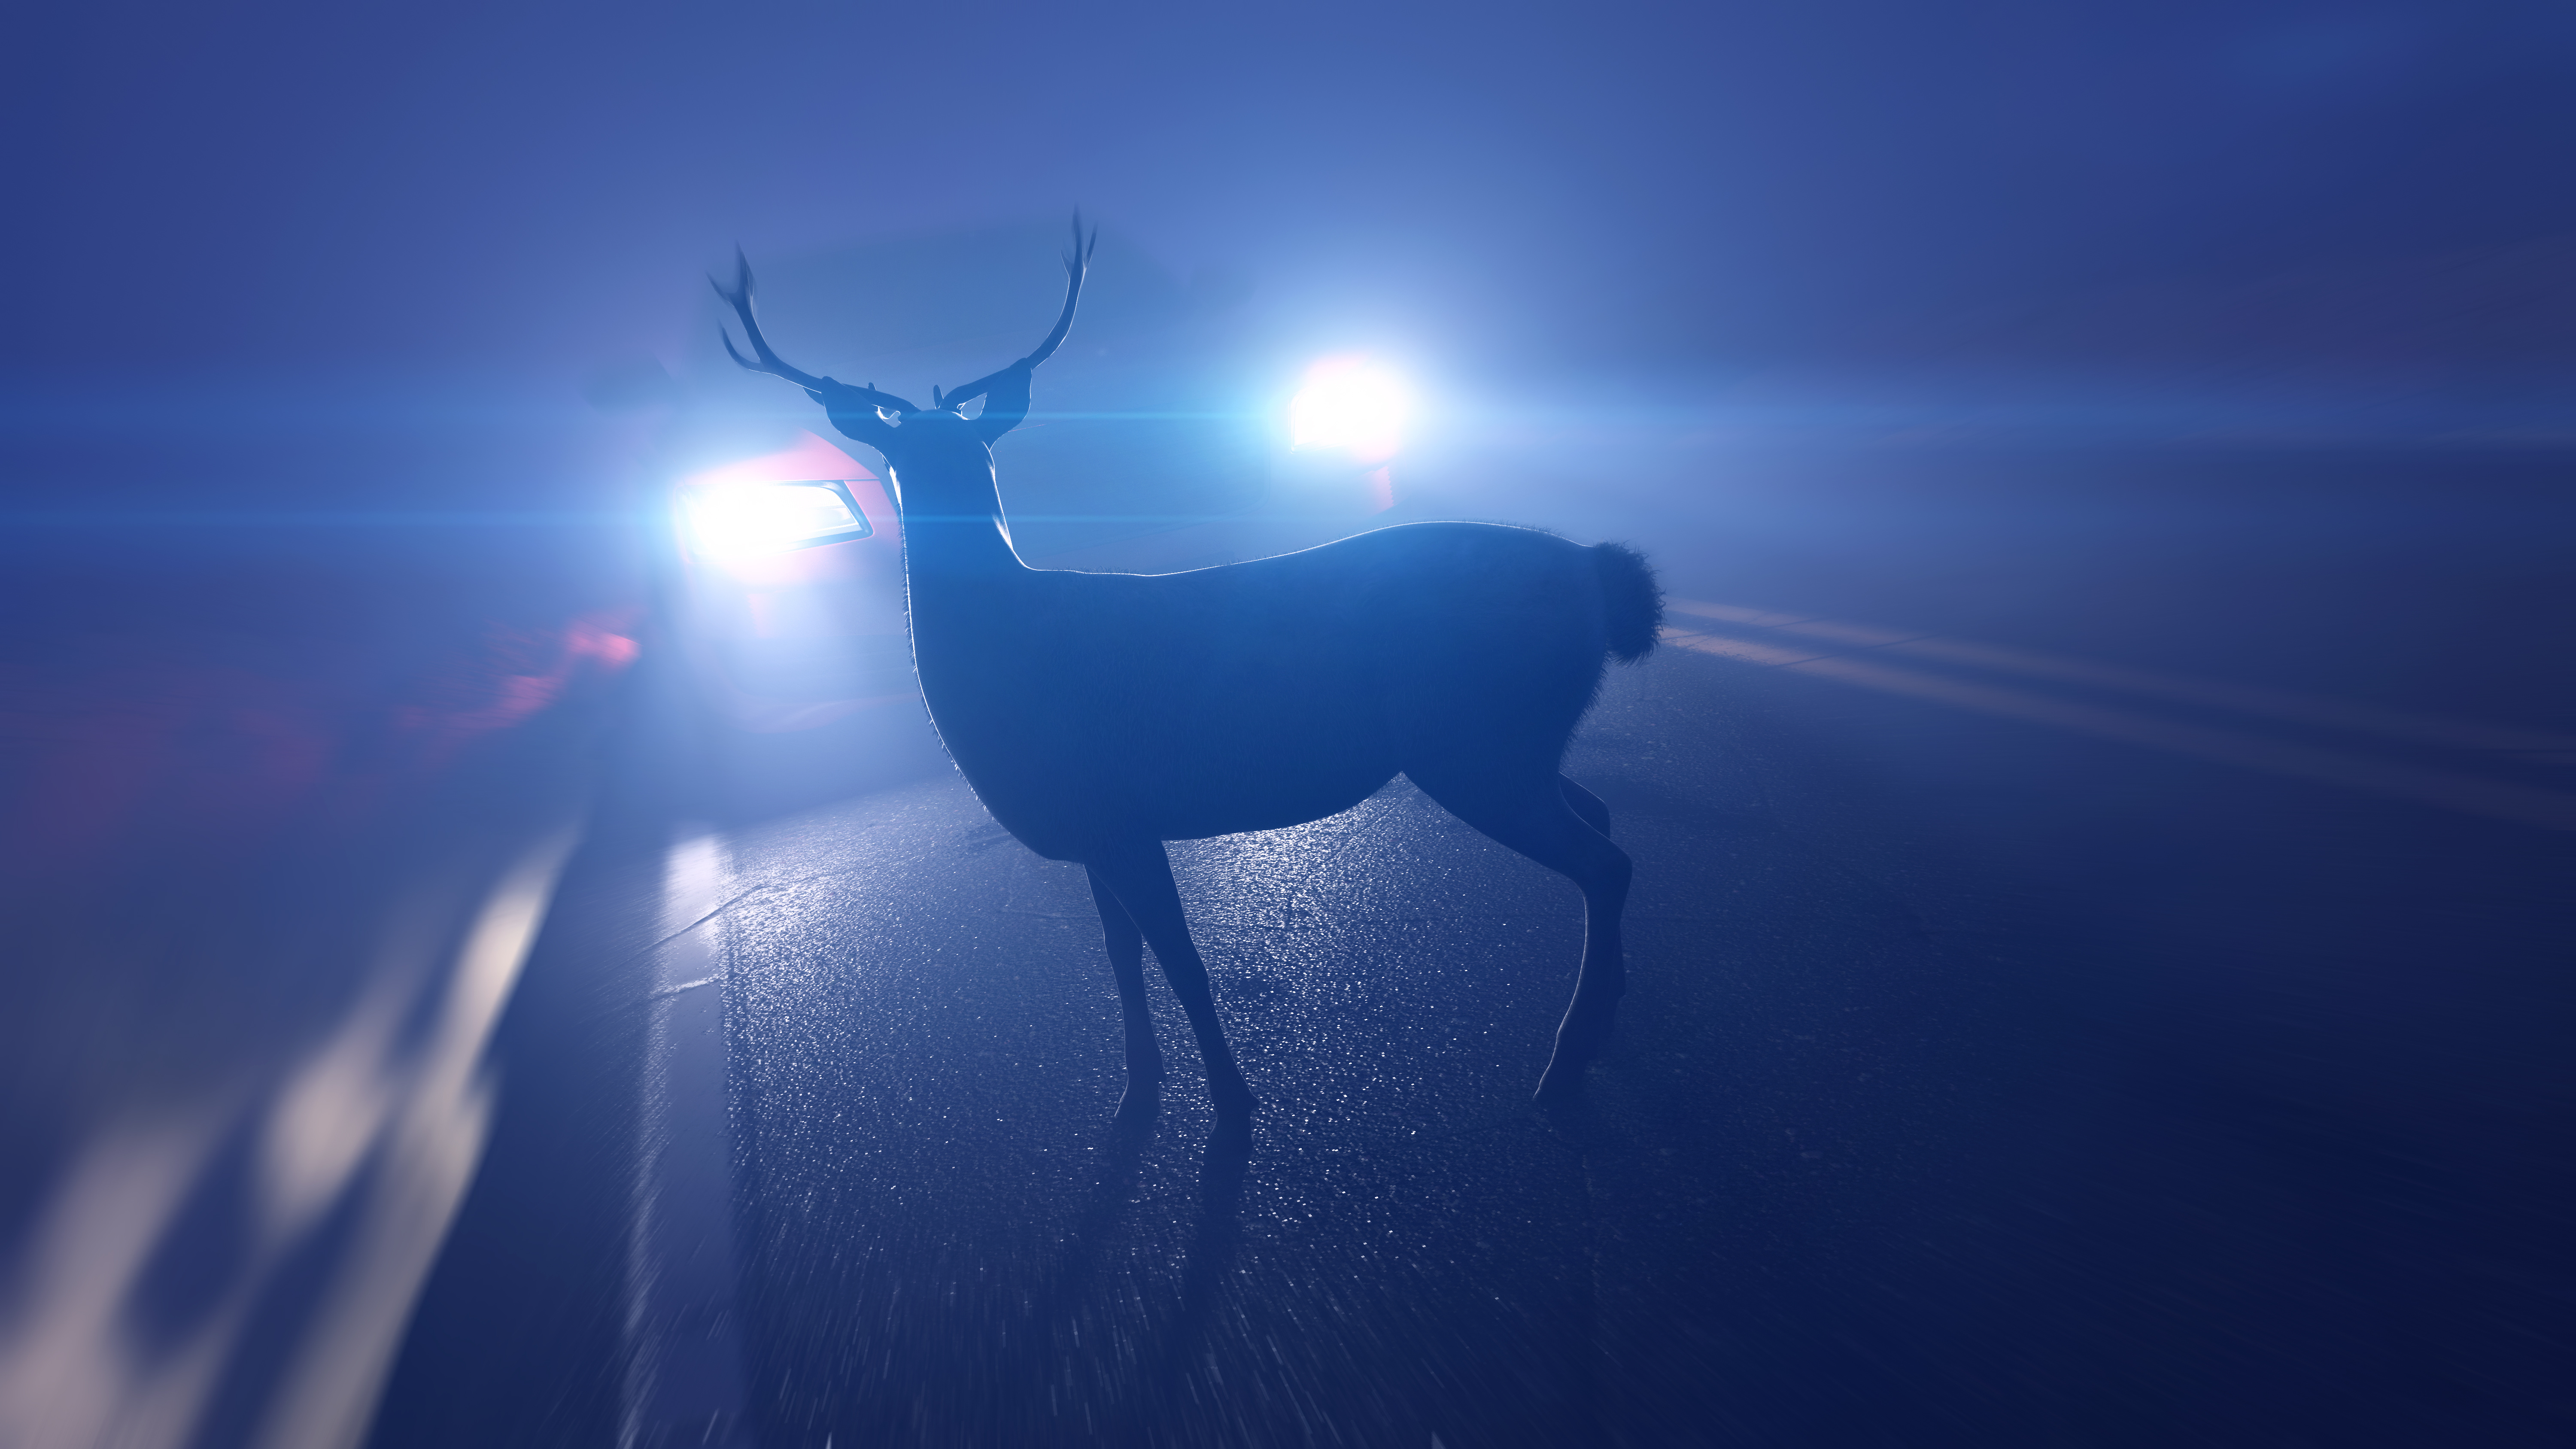 The police give drivers tips on how to behave when encountering wild animals.